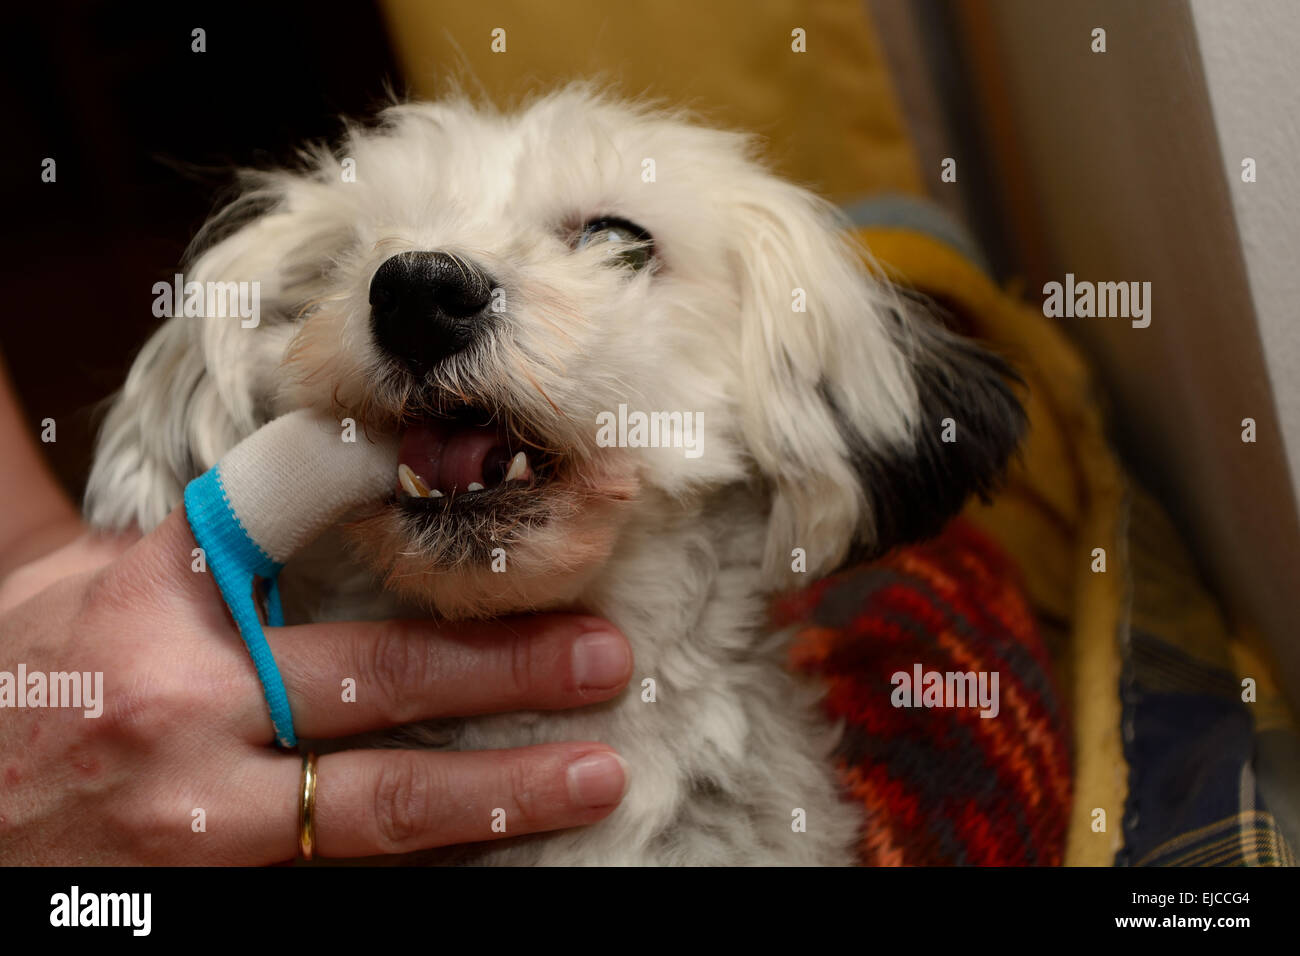 Tartar in dogs is removed Stock Photo